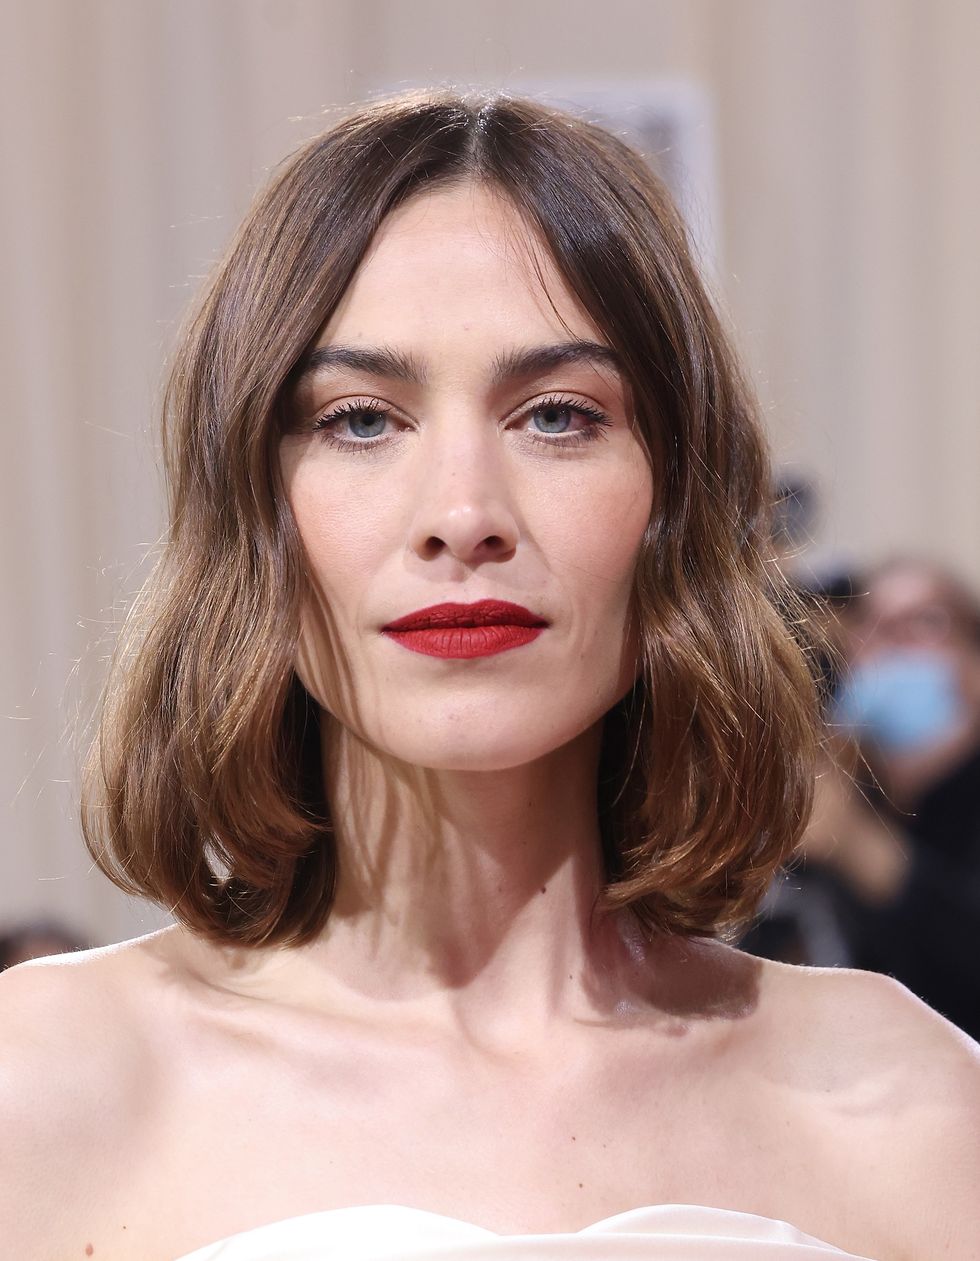 new york, new york   may 02 alexa chung attends in america an anthology of fashion, the 2022 costume institute benefit at the metropolitan museum of art on may 02, 2022 in new york city photo by taylor hillgetty images